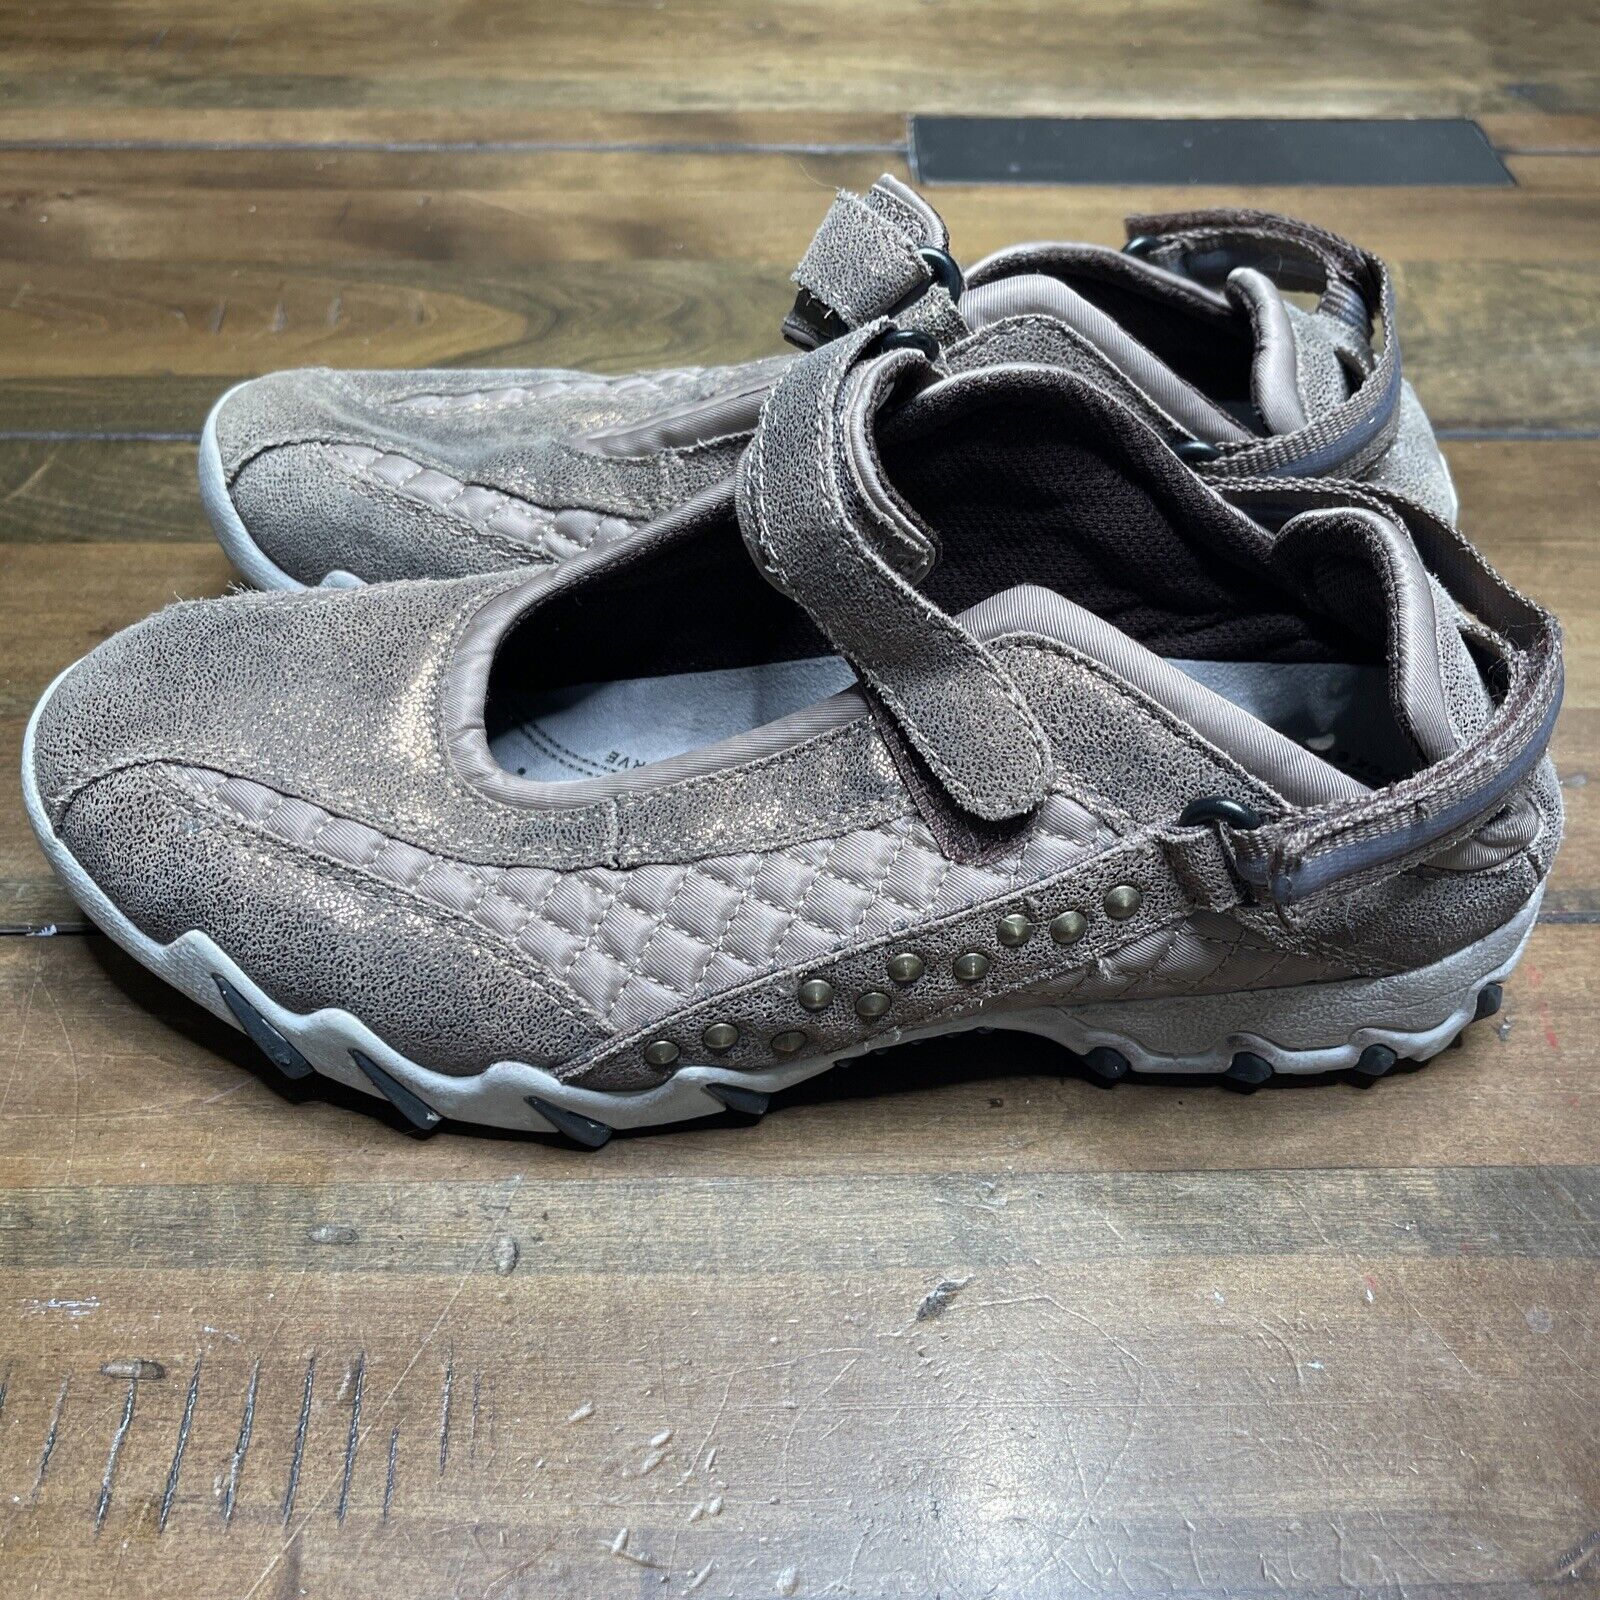 Allrounder by Mephisto Athletic Trail Running Shoe Womens Size  14152 |  eBay